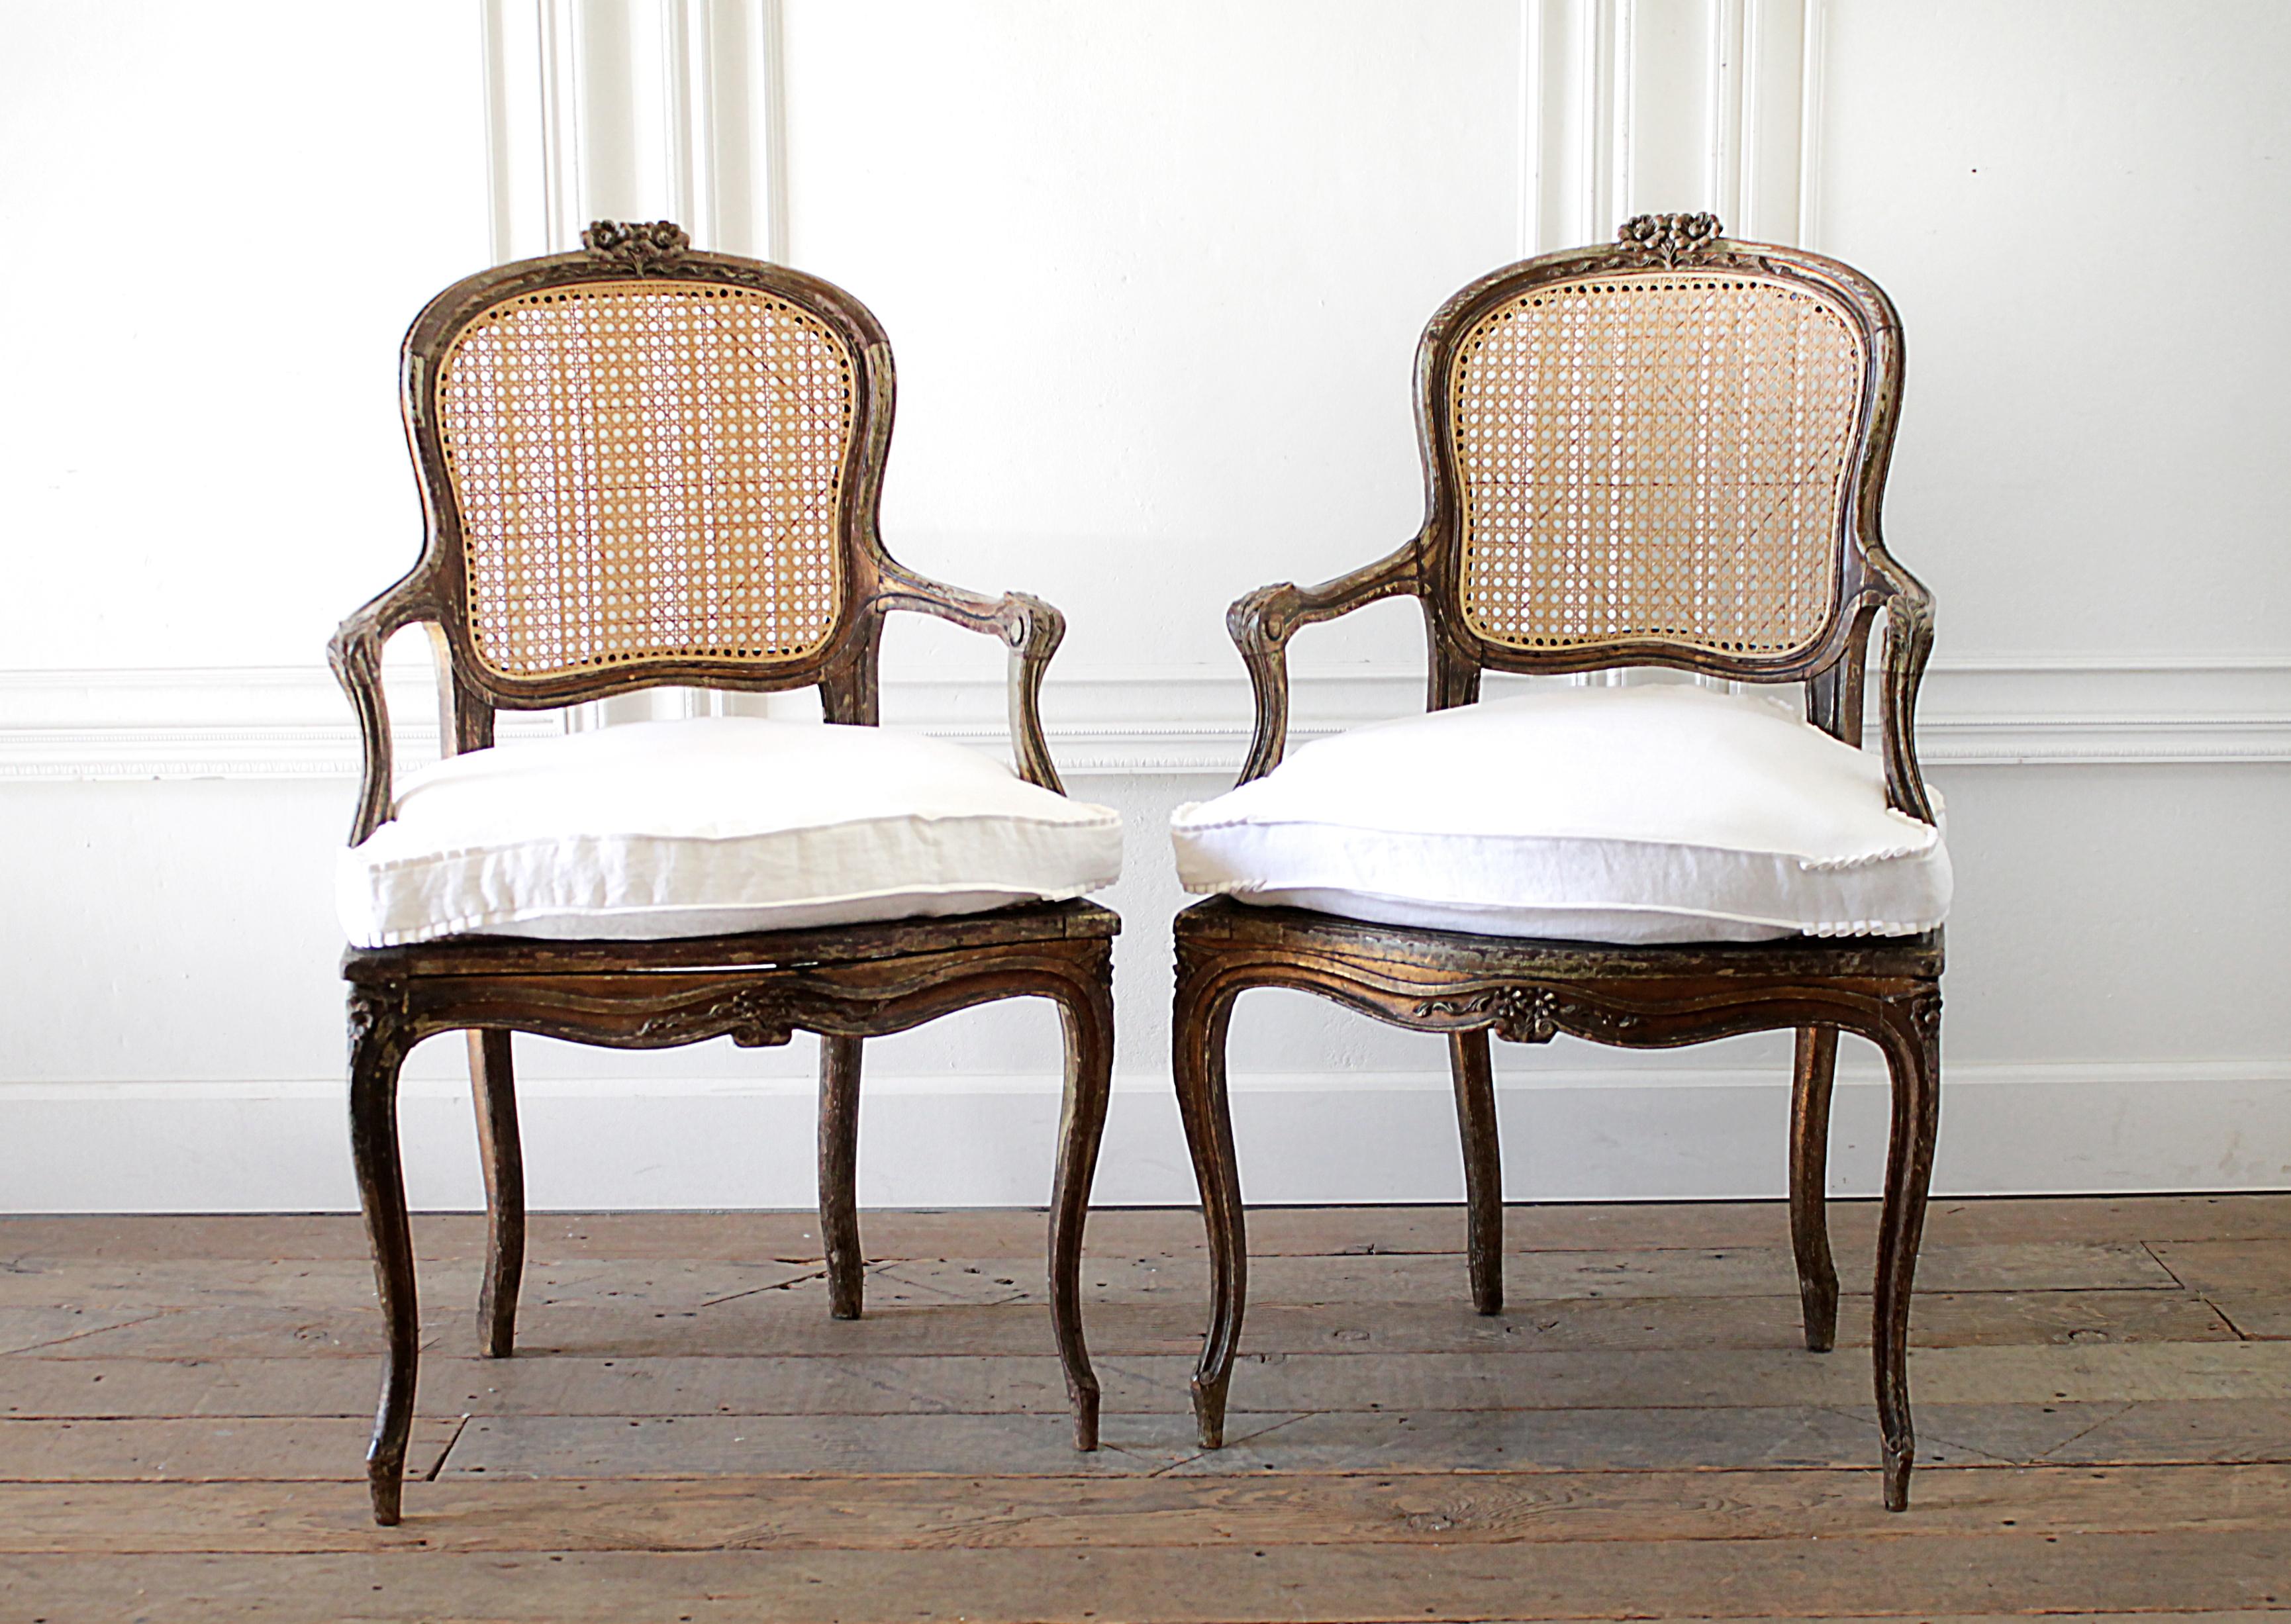 Pair of antique French cane back open armchairs with custom linen cushions
Natural aged wood with a wonderful distressed patina. The cane looks to be newer, must have been replaced at one point. The cane is a light unstained color. 
The cushions